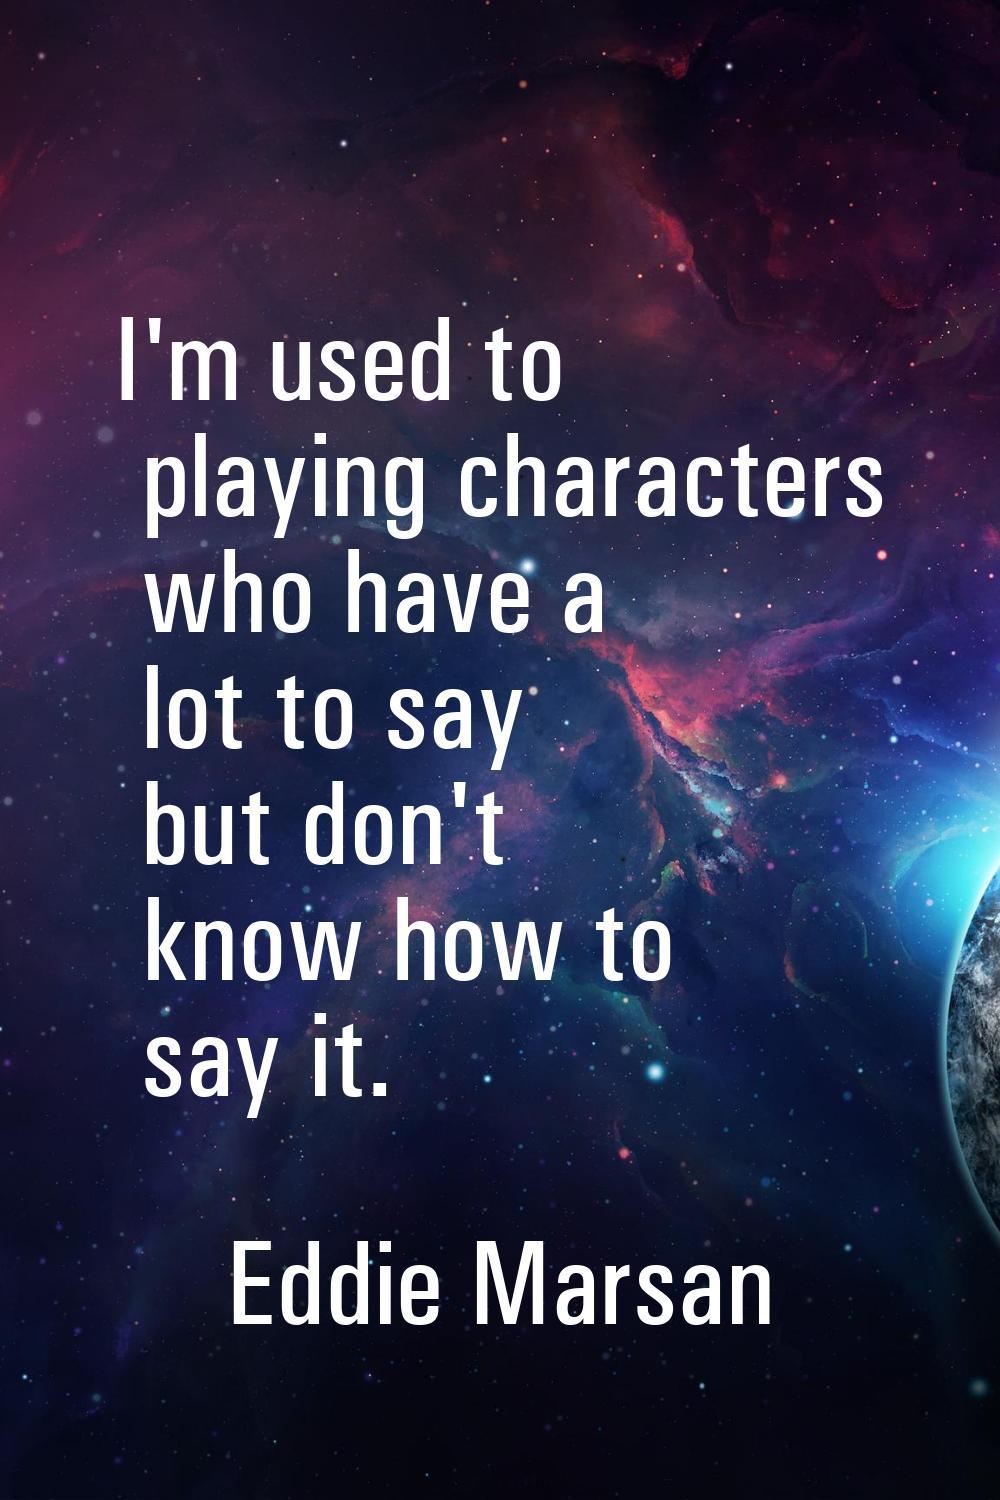 I'm used to playing characters who have a lot to say but don't know how to say it.